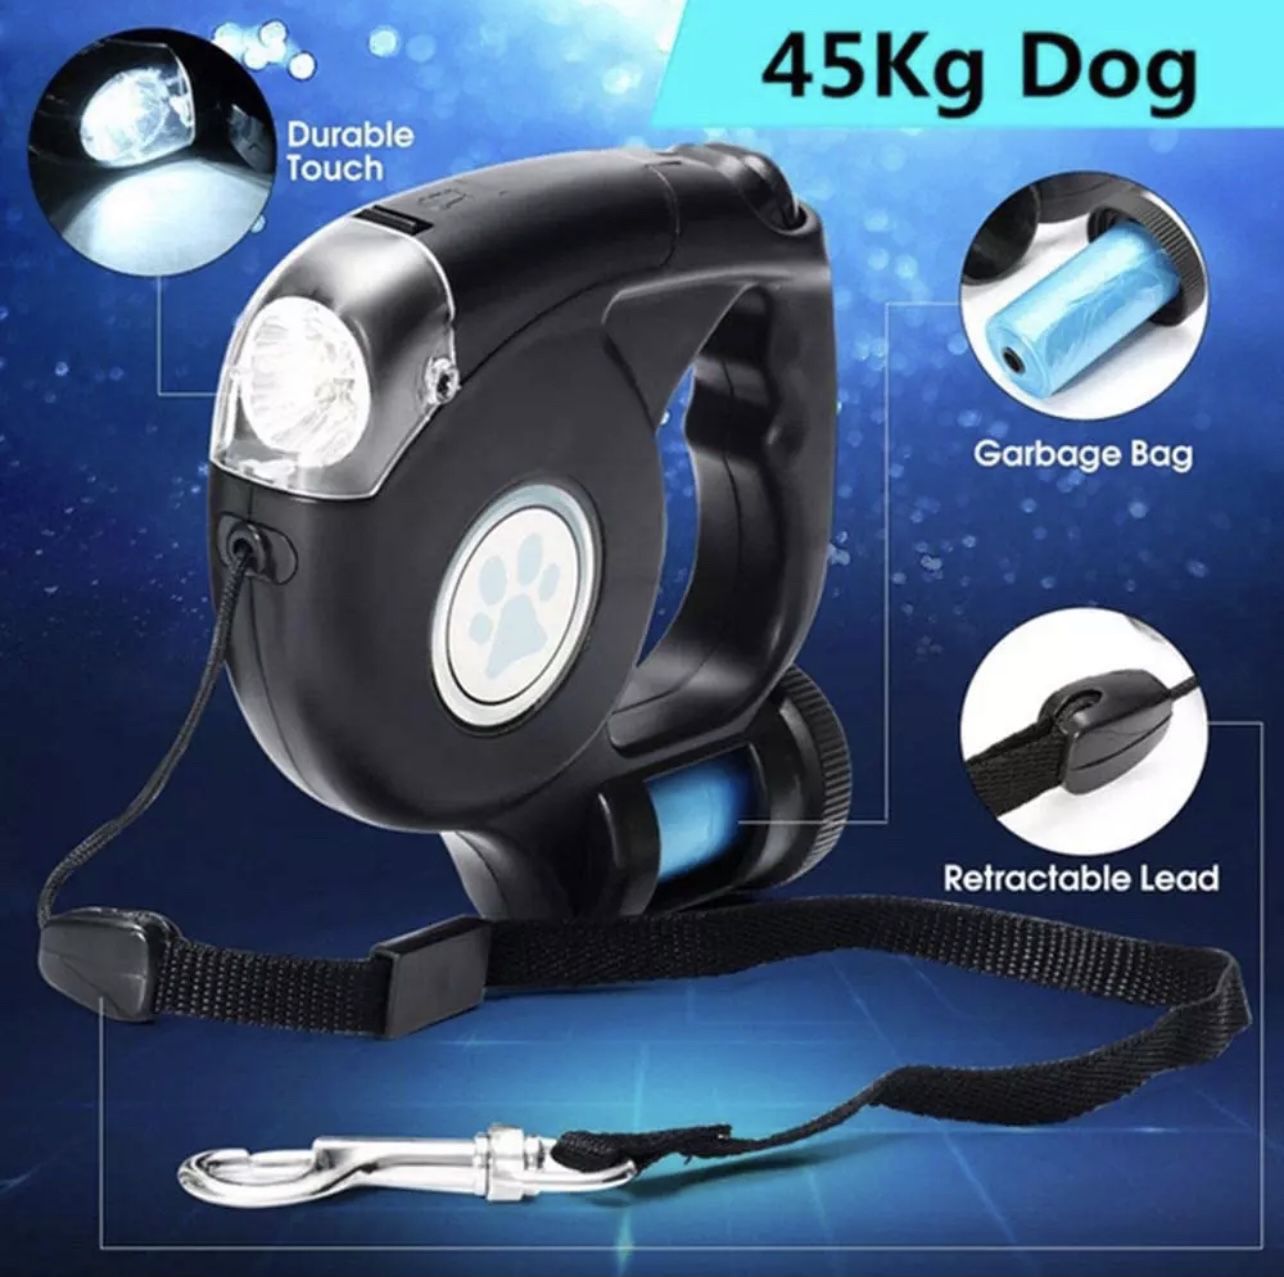 Brand New Retractable Dog Leash With Build In Dispenser And LED Light Waterproof